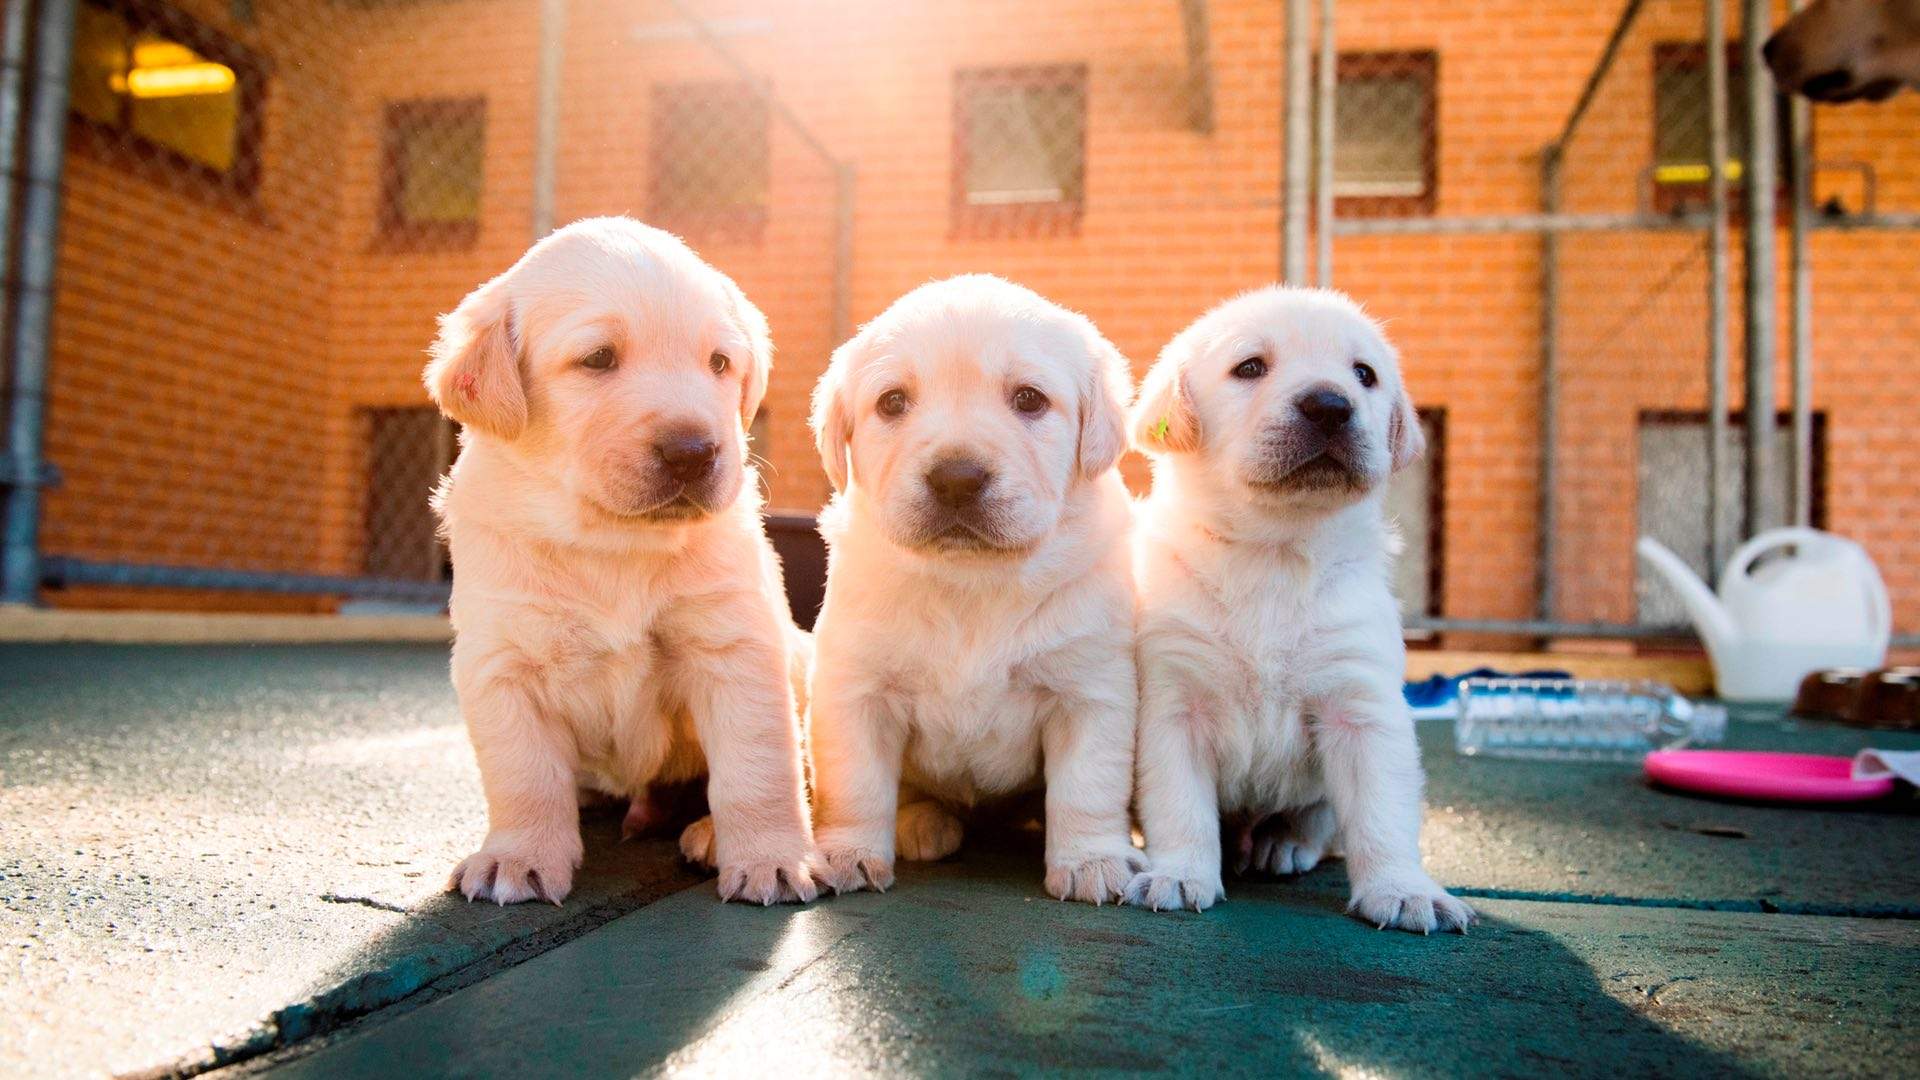 Sydney, You're Up: Guide Dogs NSW Wants You to Look After These Adorable New Pups